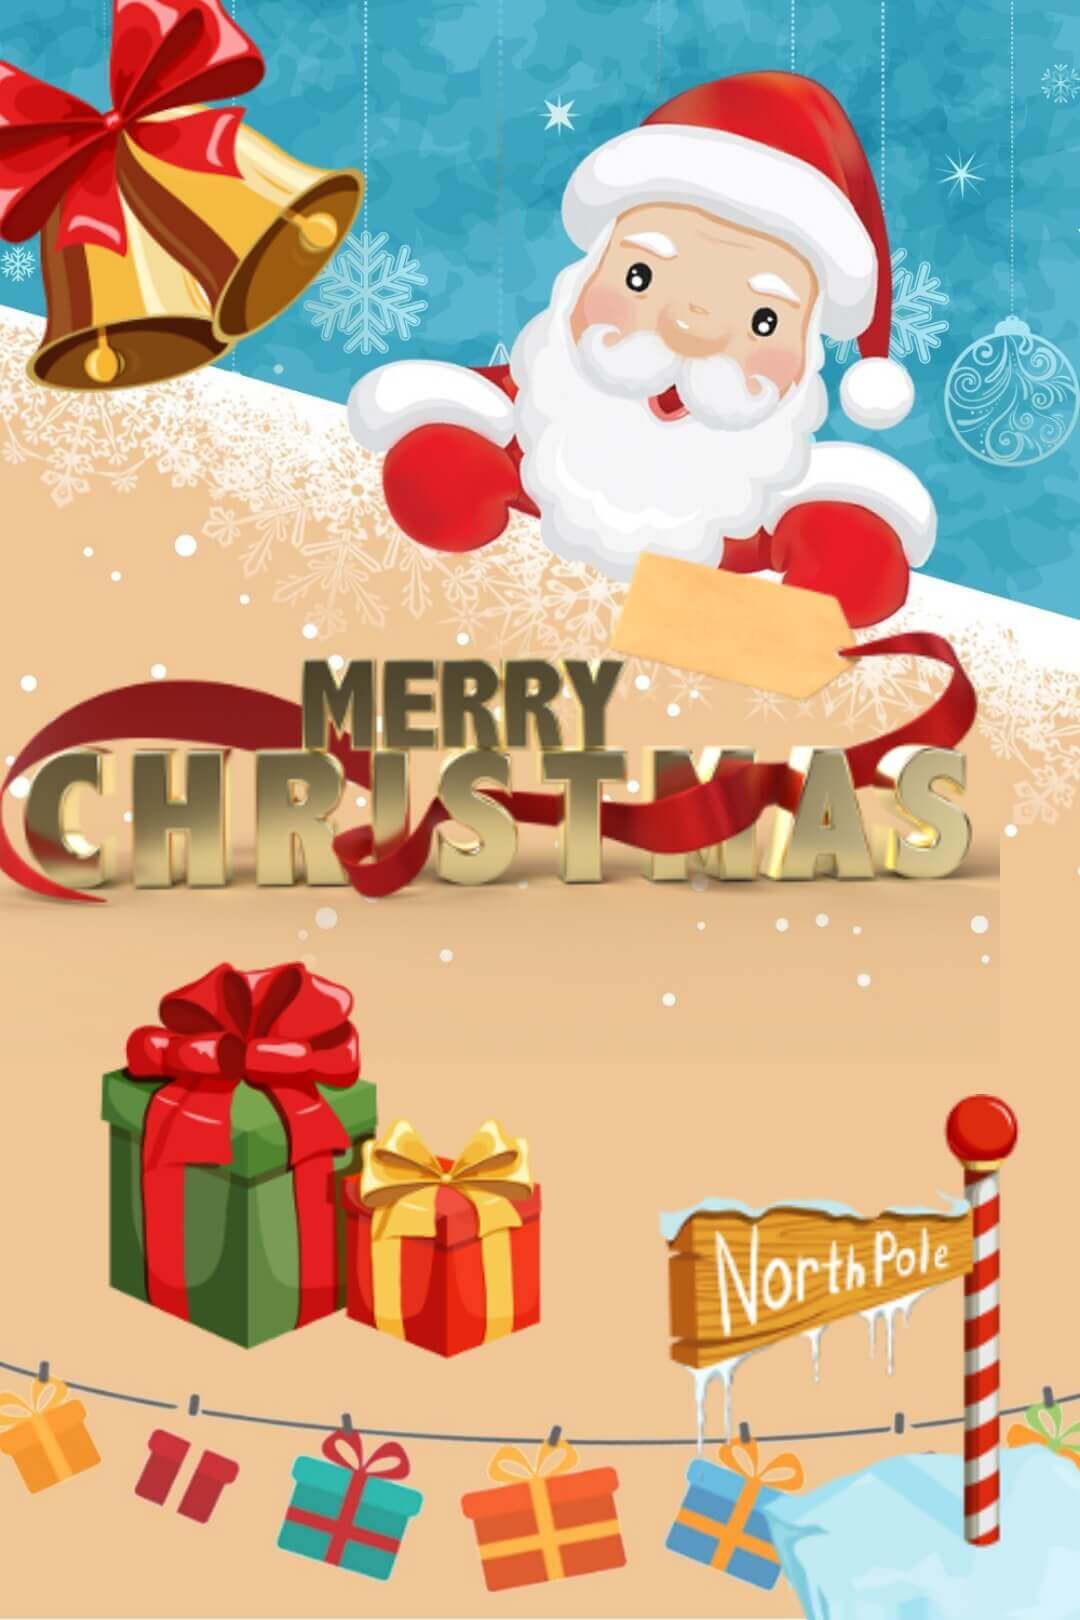 Merry Christmas Greetings Pictures